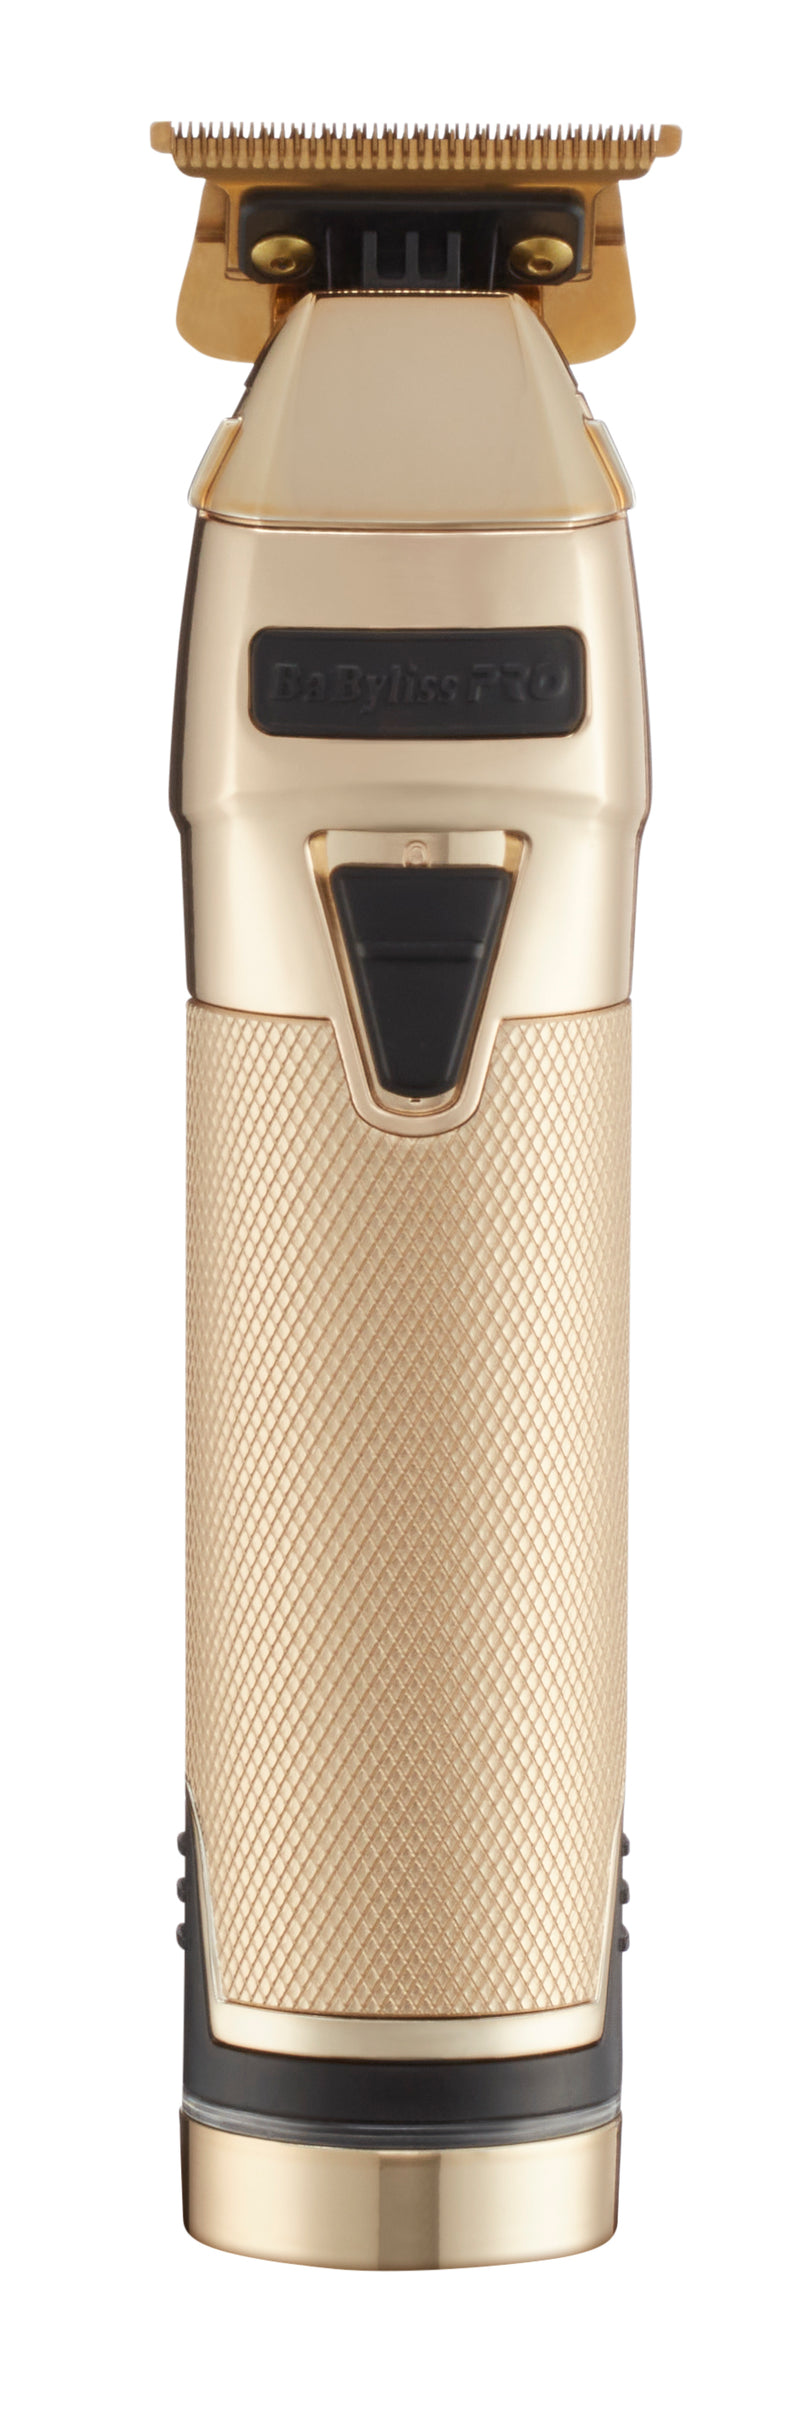 BaBylissPRO SnapFX Cordless Trimmer w/ Snap In/Out Dual Lithium Battery System + Base - Limited Edition Gold (FX797GI)